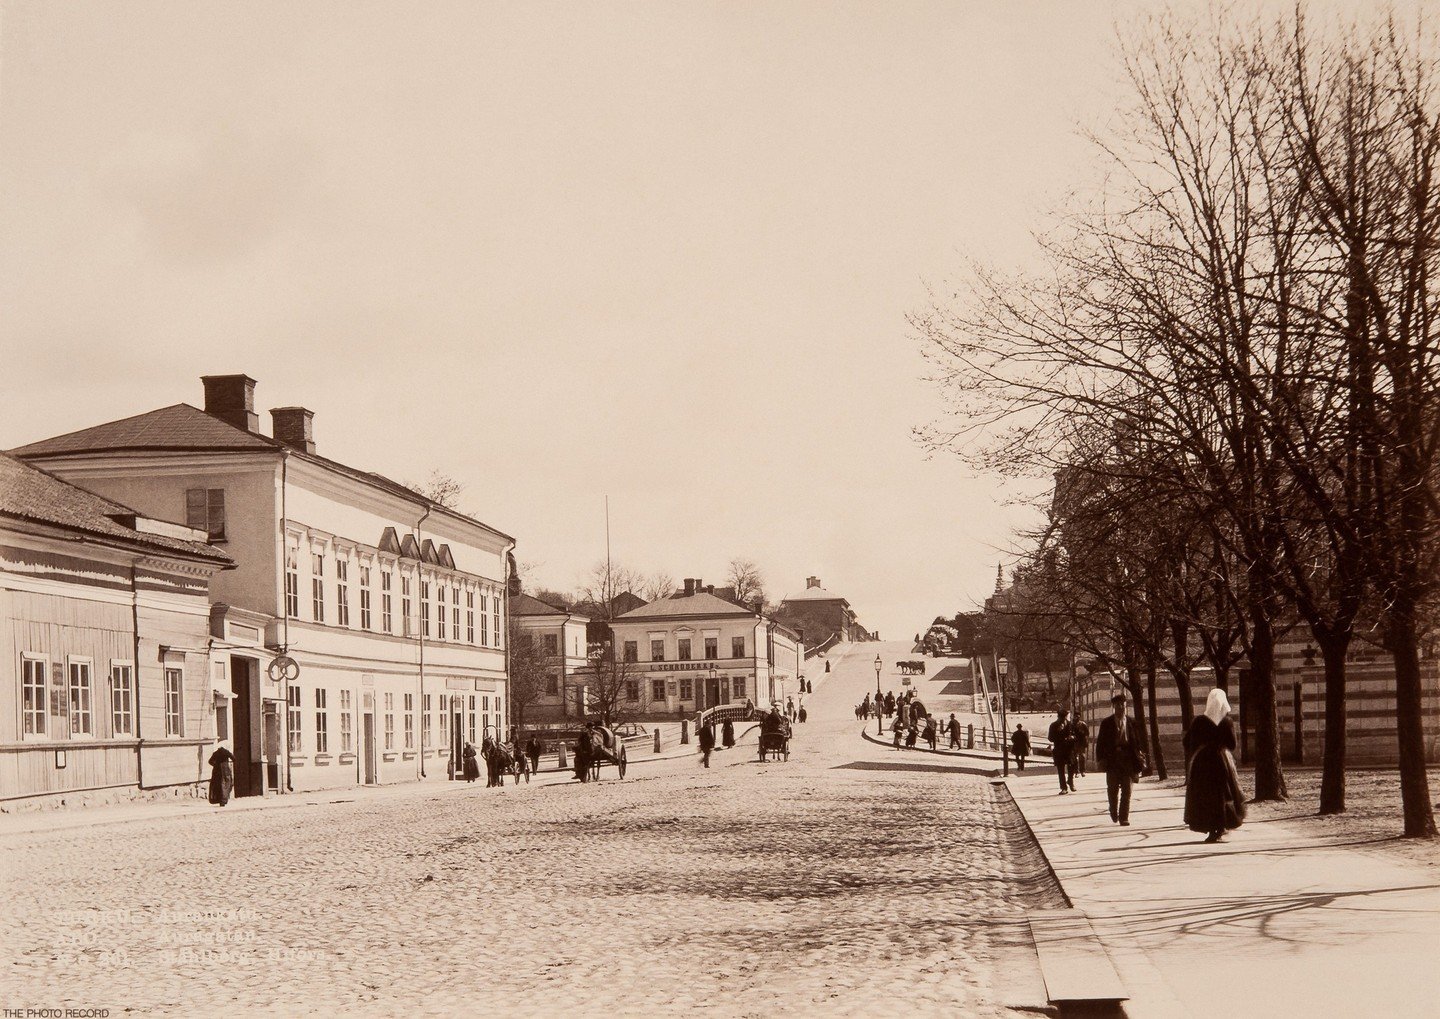 In the 1890s, Aurakatu in Turku was a bustling street characterized by a mix of residential and commercial buildings, reflecting the city's status as an important cultural and commercial center. Lined with shops, cafes, and businesses, the street was